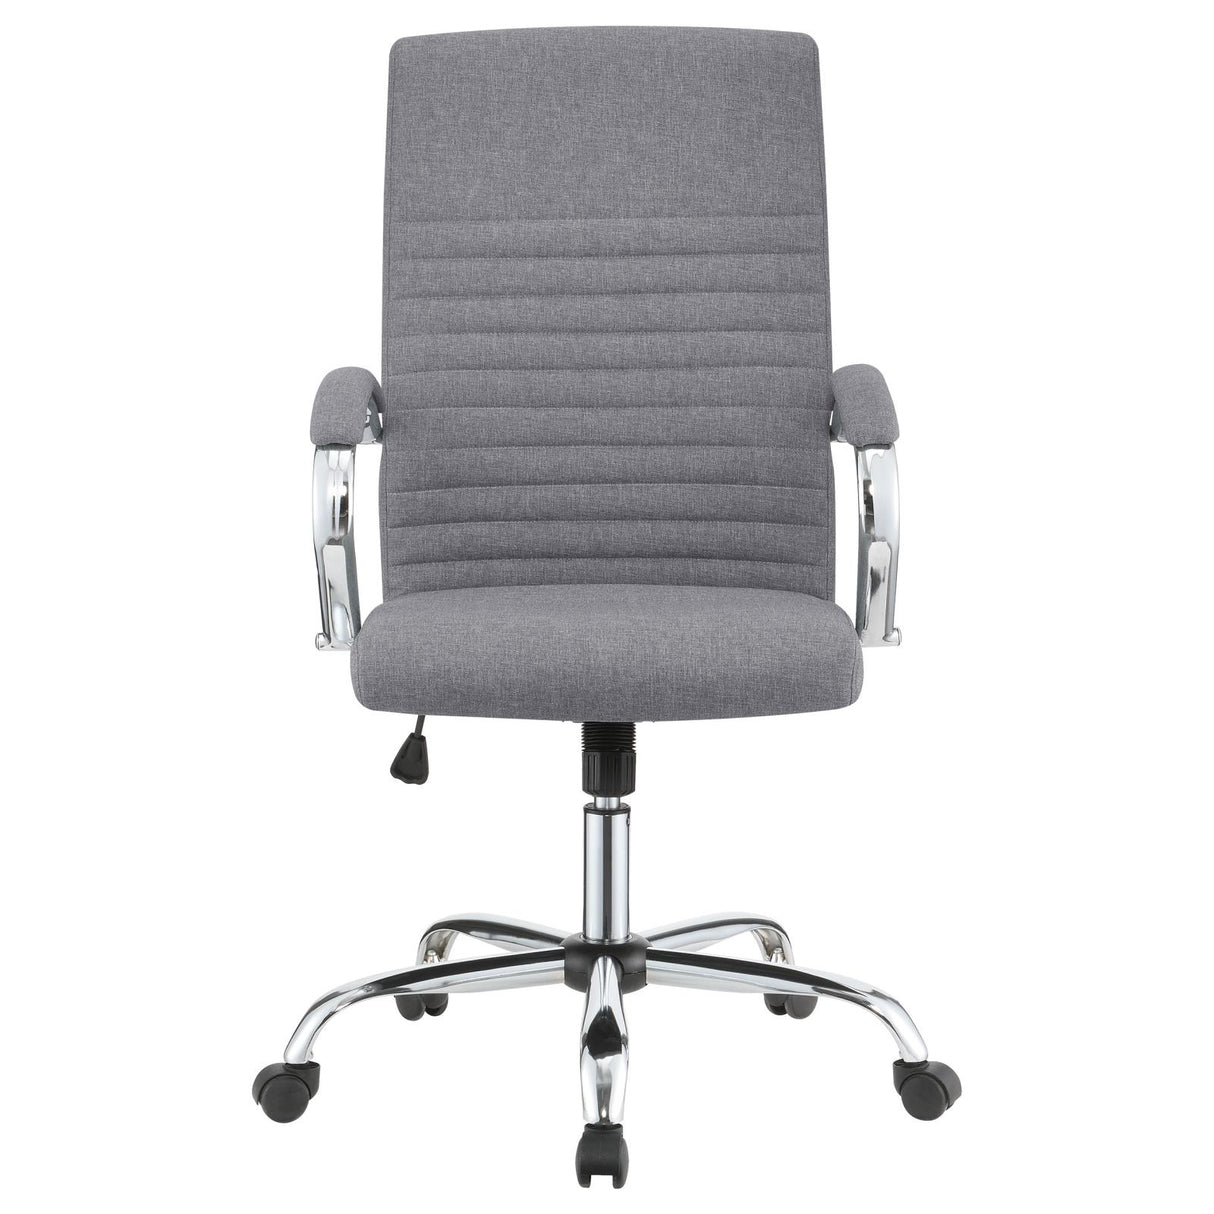 Abisko Upholstered Office Chair with Casters Grey and Chrome - 881217 - Luna Furniture